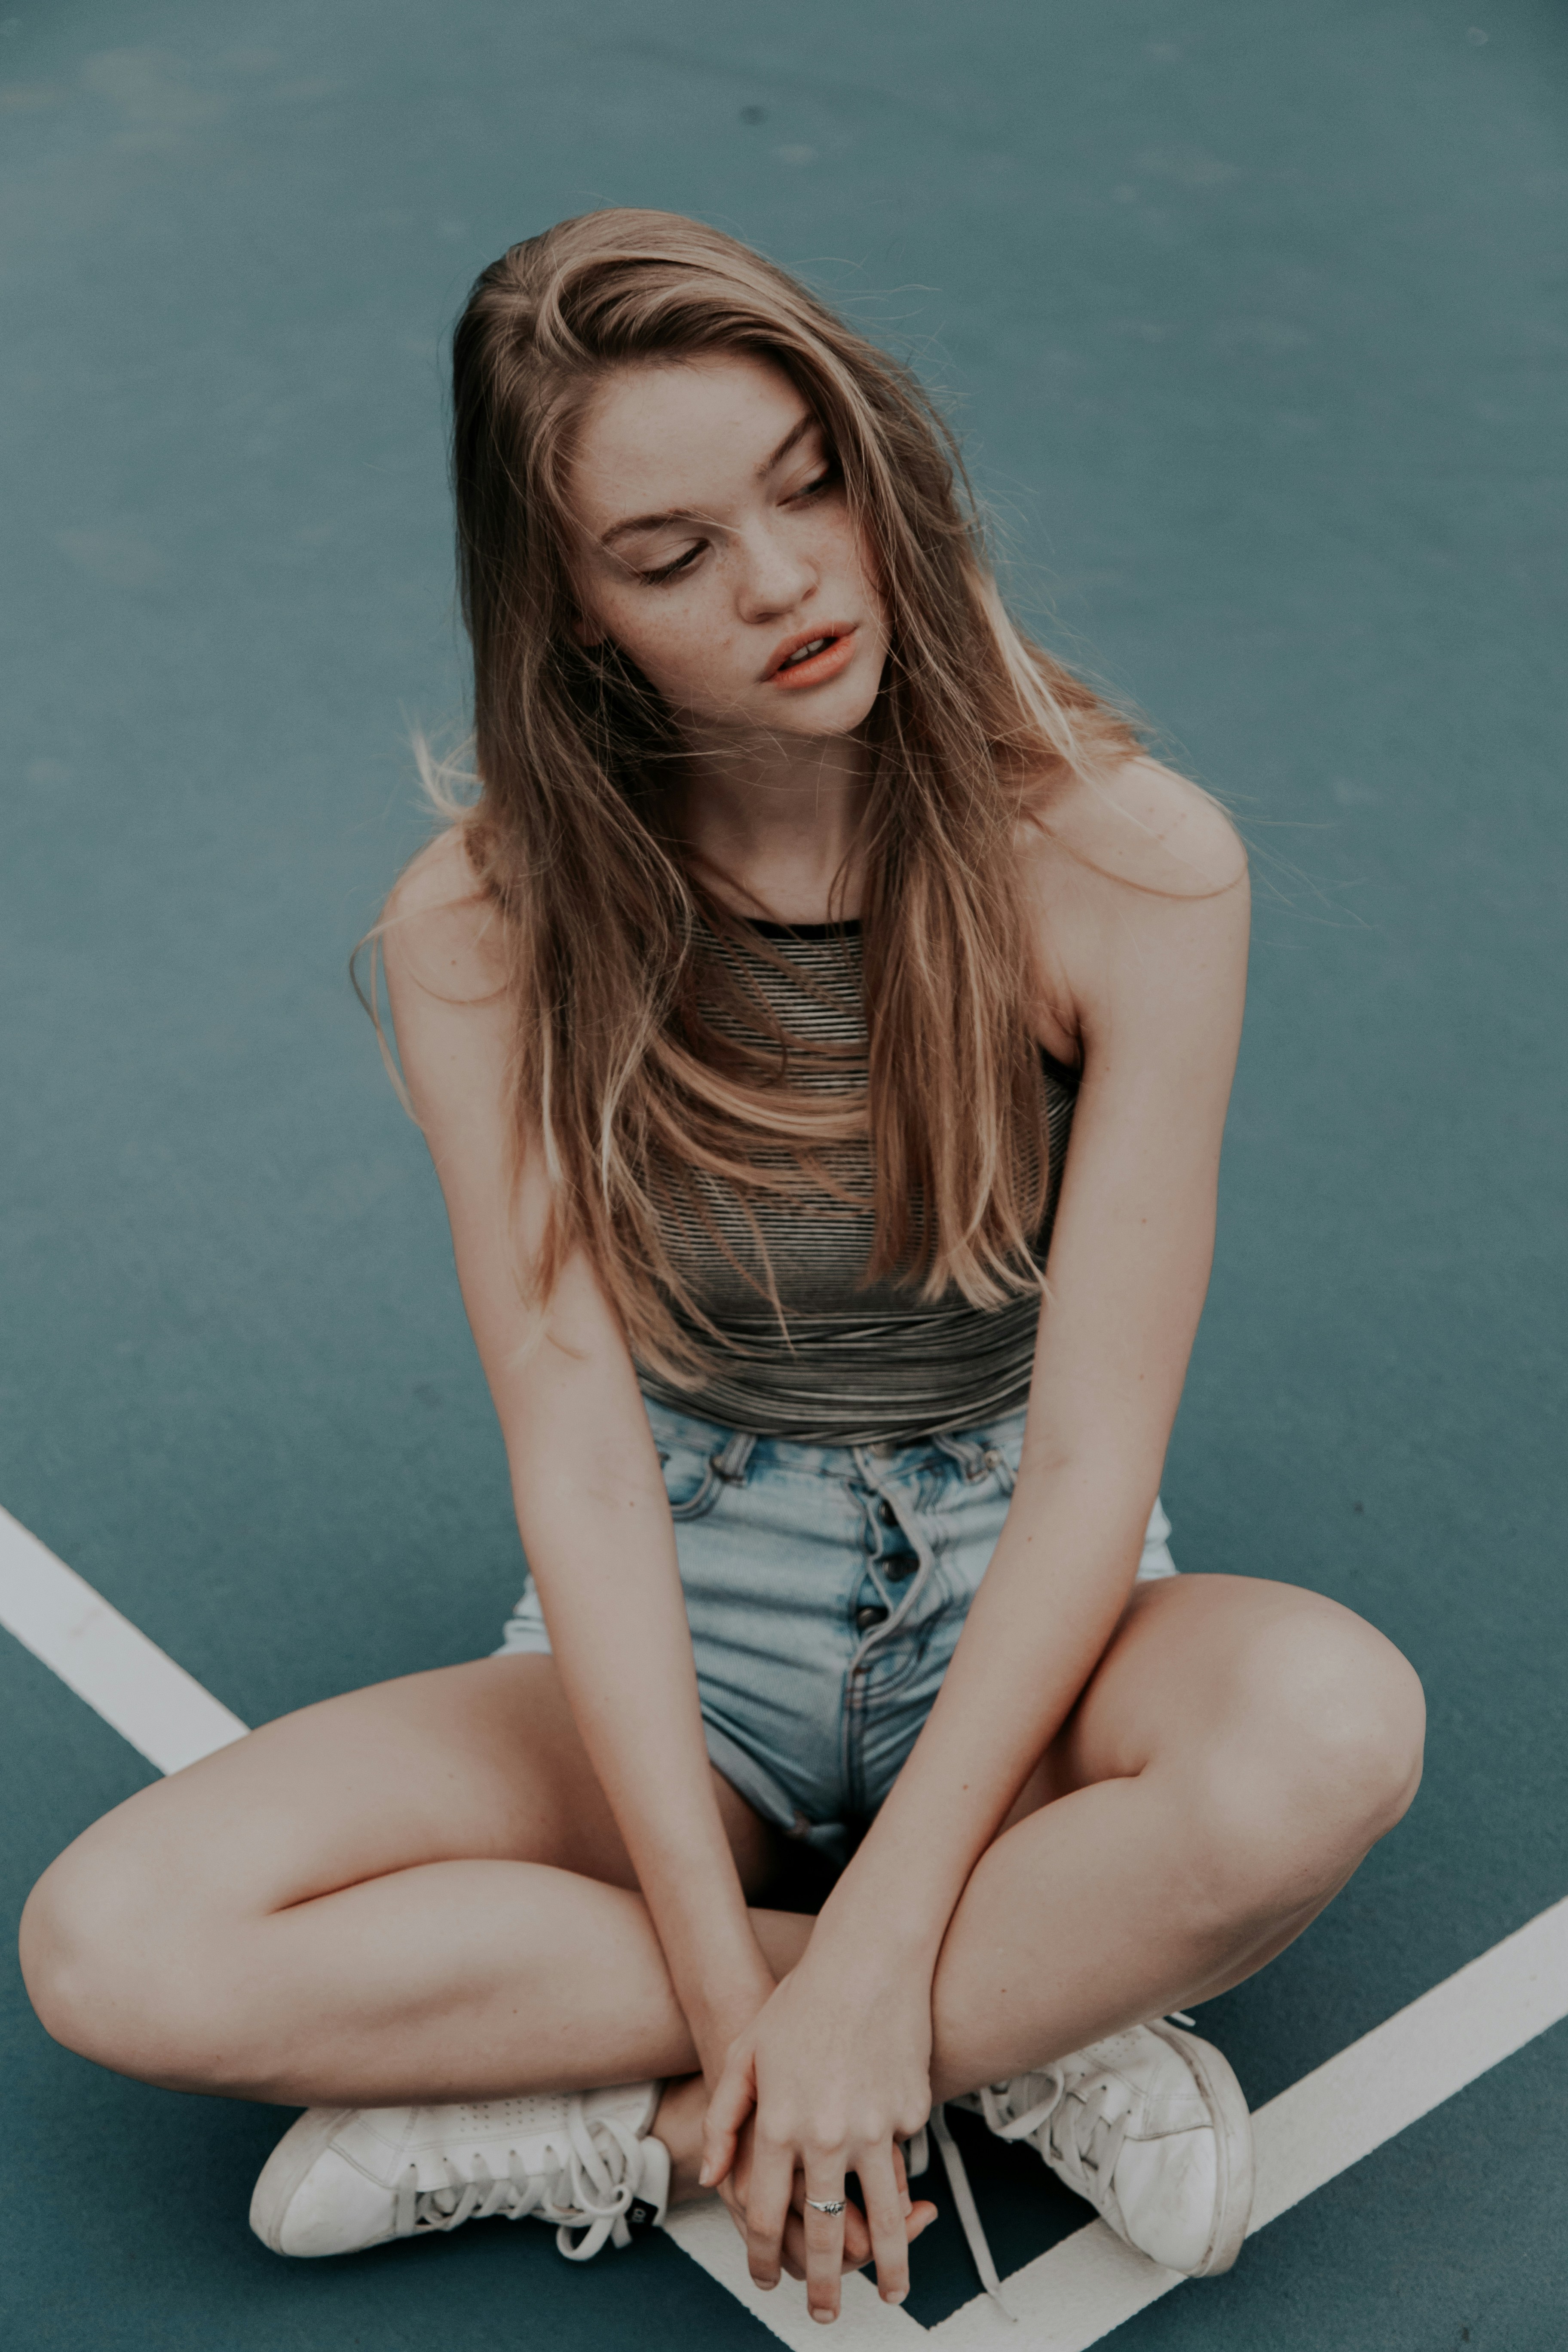 550+ Young Teenage Girl Pictures Download Free Images on Unsplash